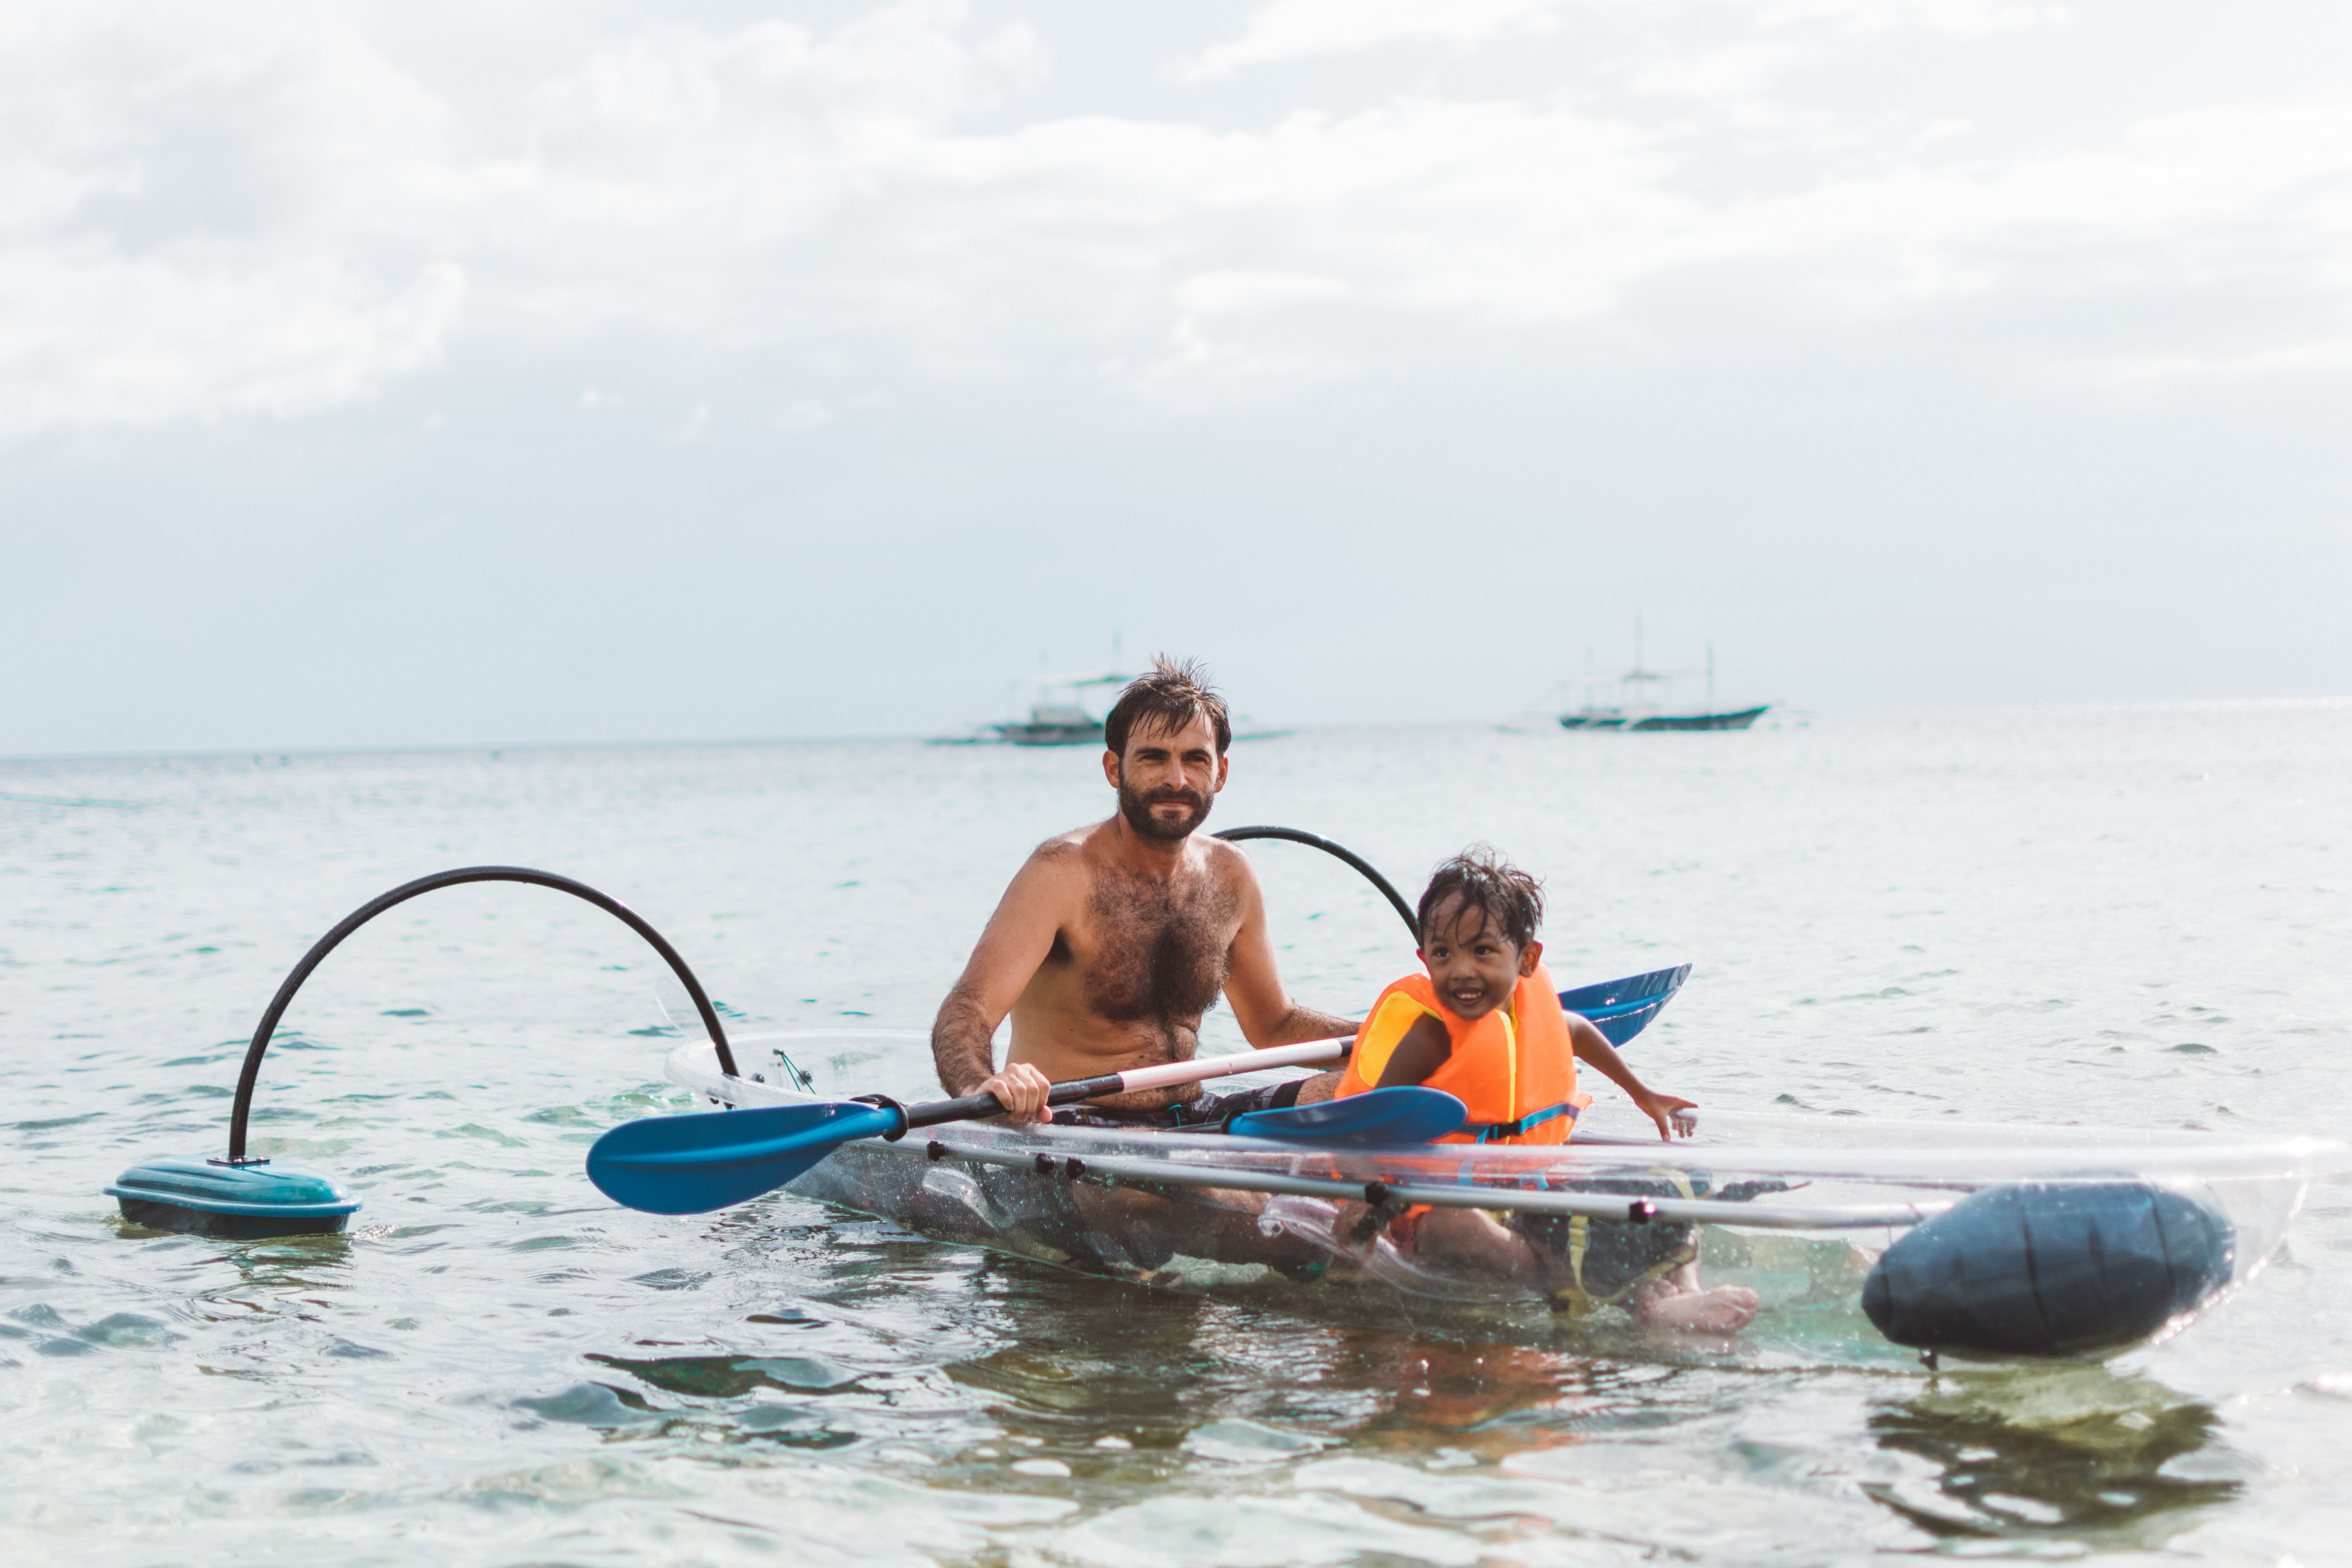 rent a kayak in Moalboal, Moalboal Itinerary, things to do in moalboal, what to do in moalboal at night, moalboal cebu itinerary, moalboal philippines, where to stay in moalboal,moalboal tourism,basdaku moalboal,things to see in moalboal cebu, pescadores island, Lambug Beach